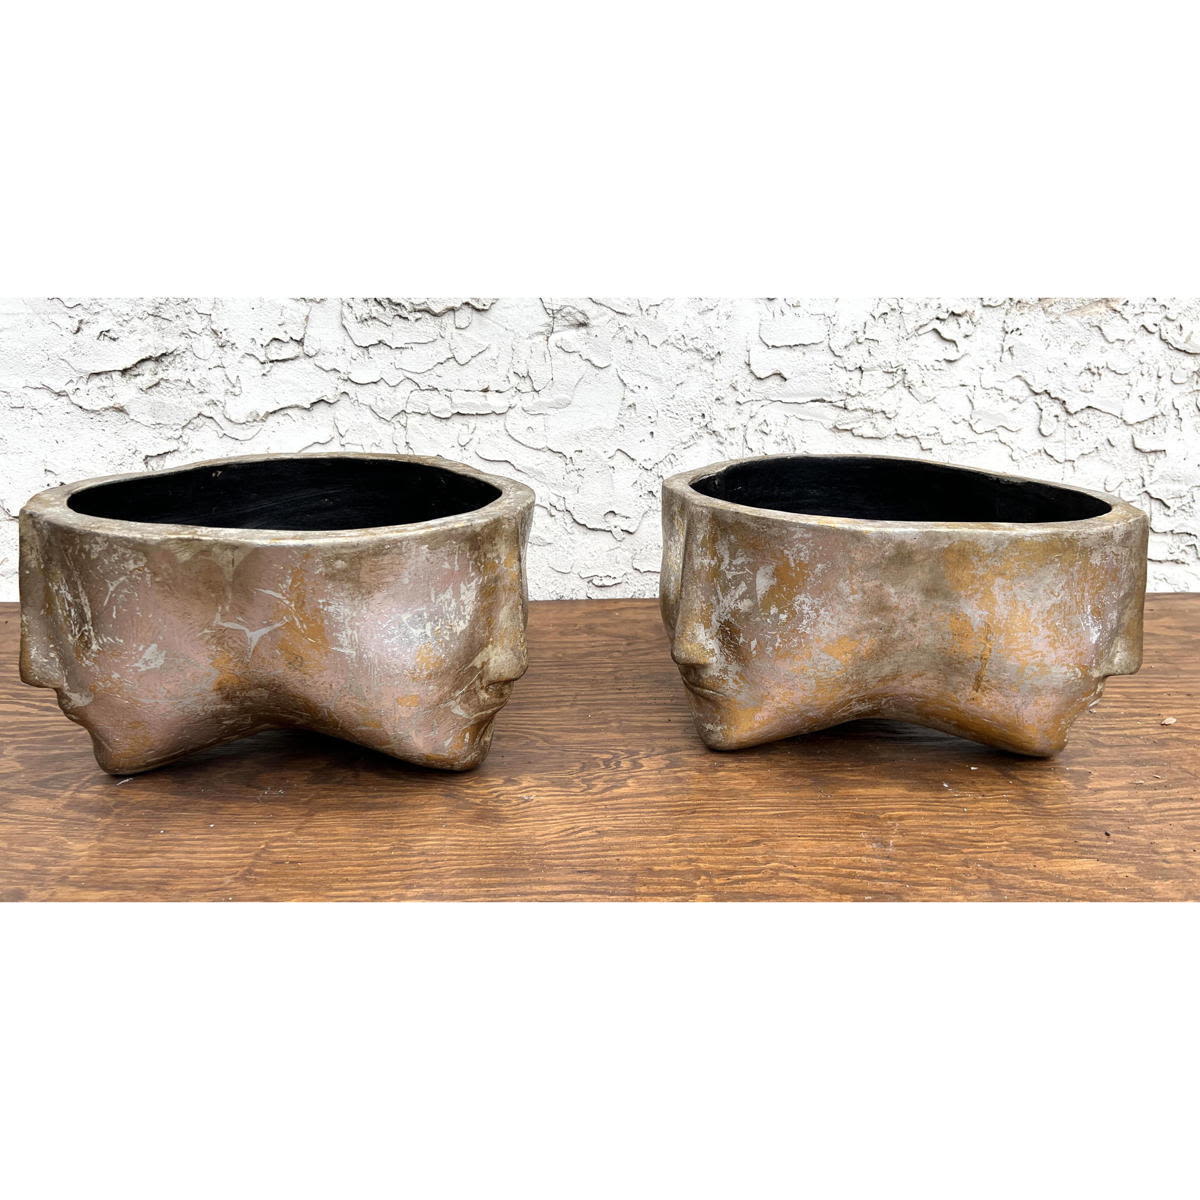 Pair Three Face Planters. Pottery